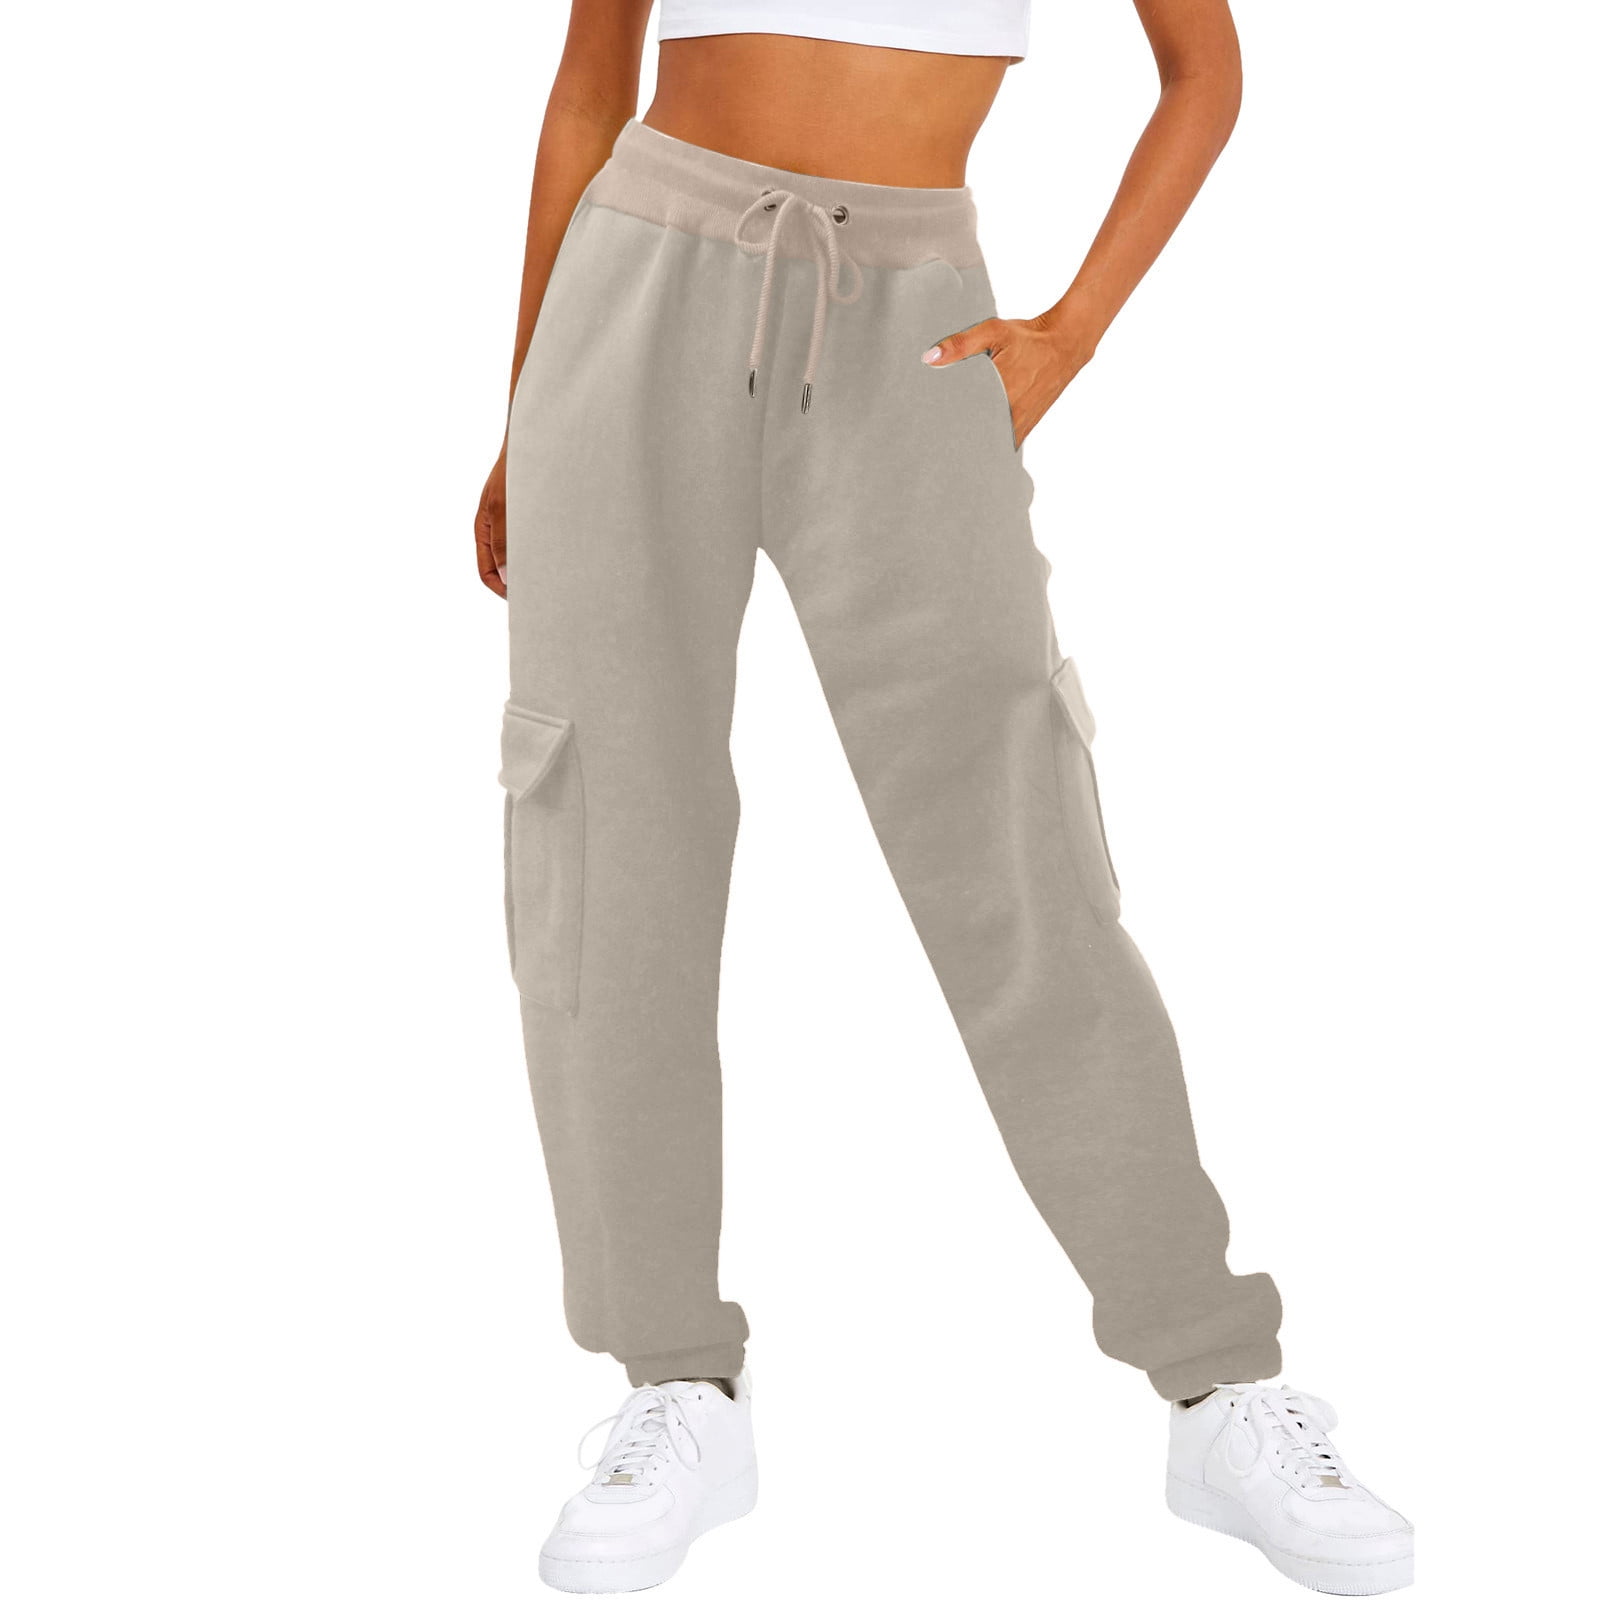 Susanny Petite Sweatpants for Women Elastic Ankle Cinch Bottom Drawstring  High Waisted with Pockets Straight Leg Sweat Pants Fall Cotton Baggy Pants  Long Trendy Jogger Pants Complexion S 